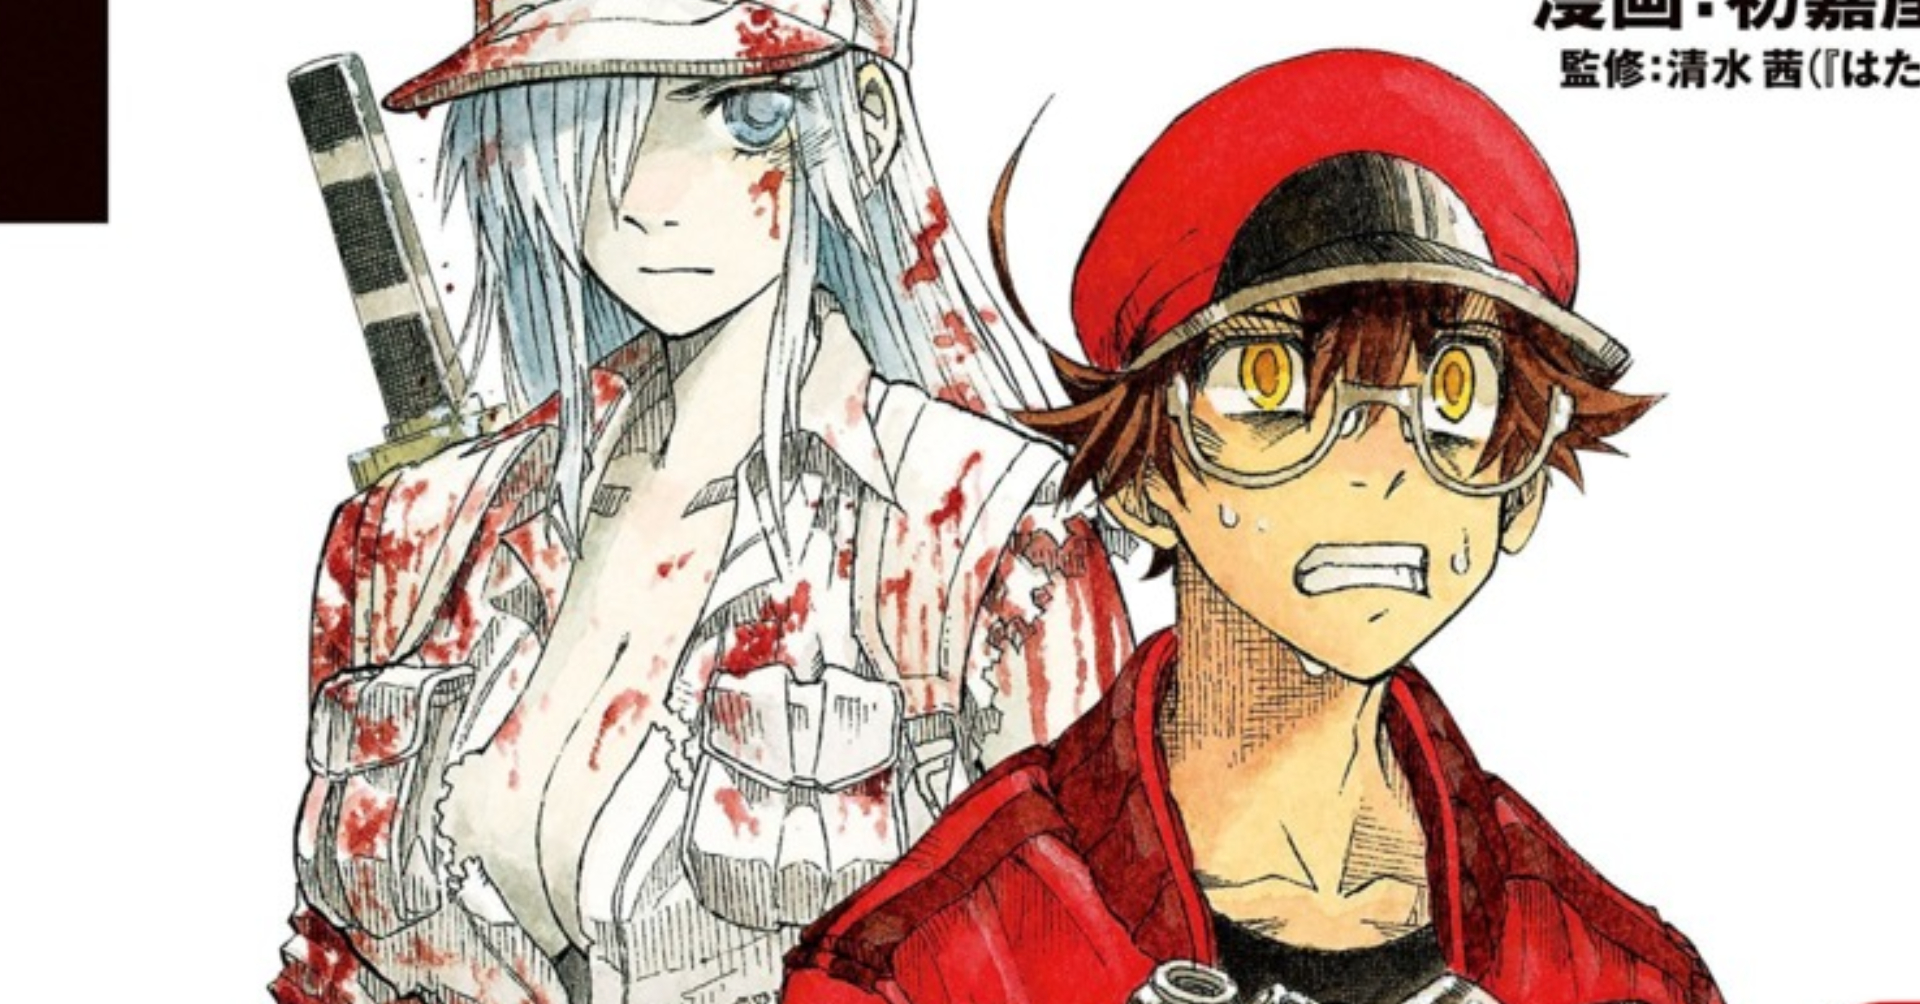 New Cells at Work Spin-off Starts This Winter - Anime Corner